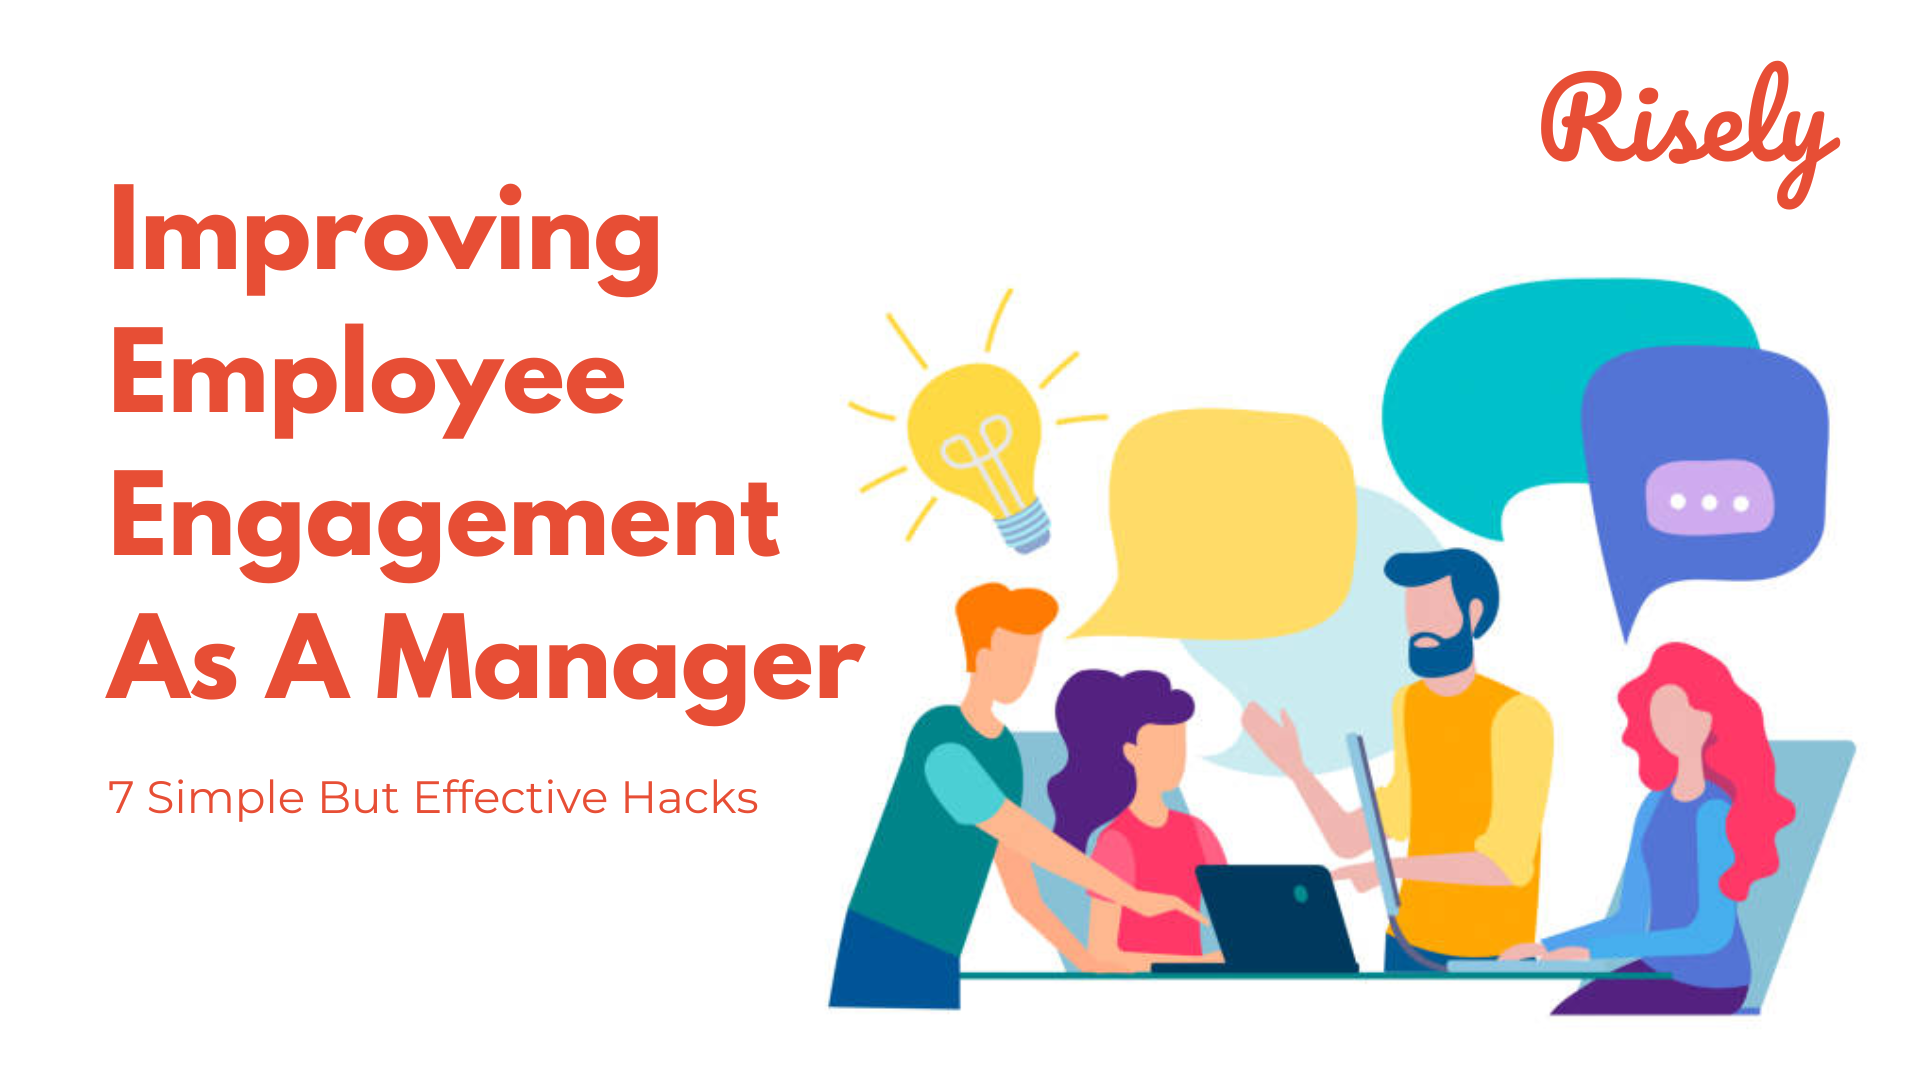 Improving Employee Engagement As A Manager: 7 Simple Hacks